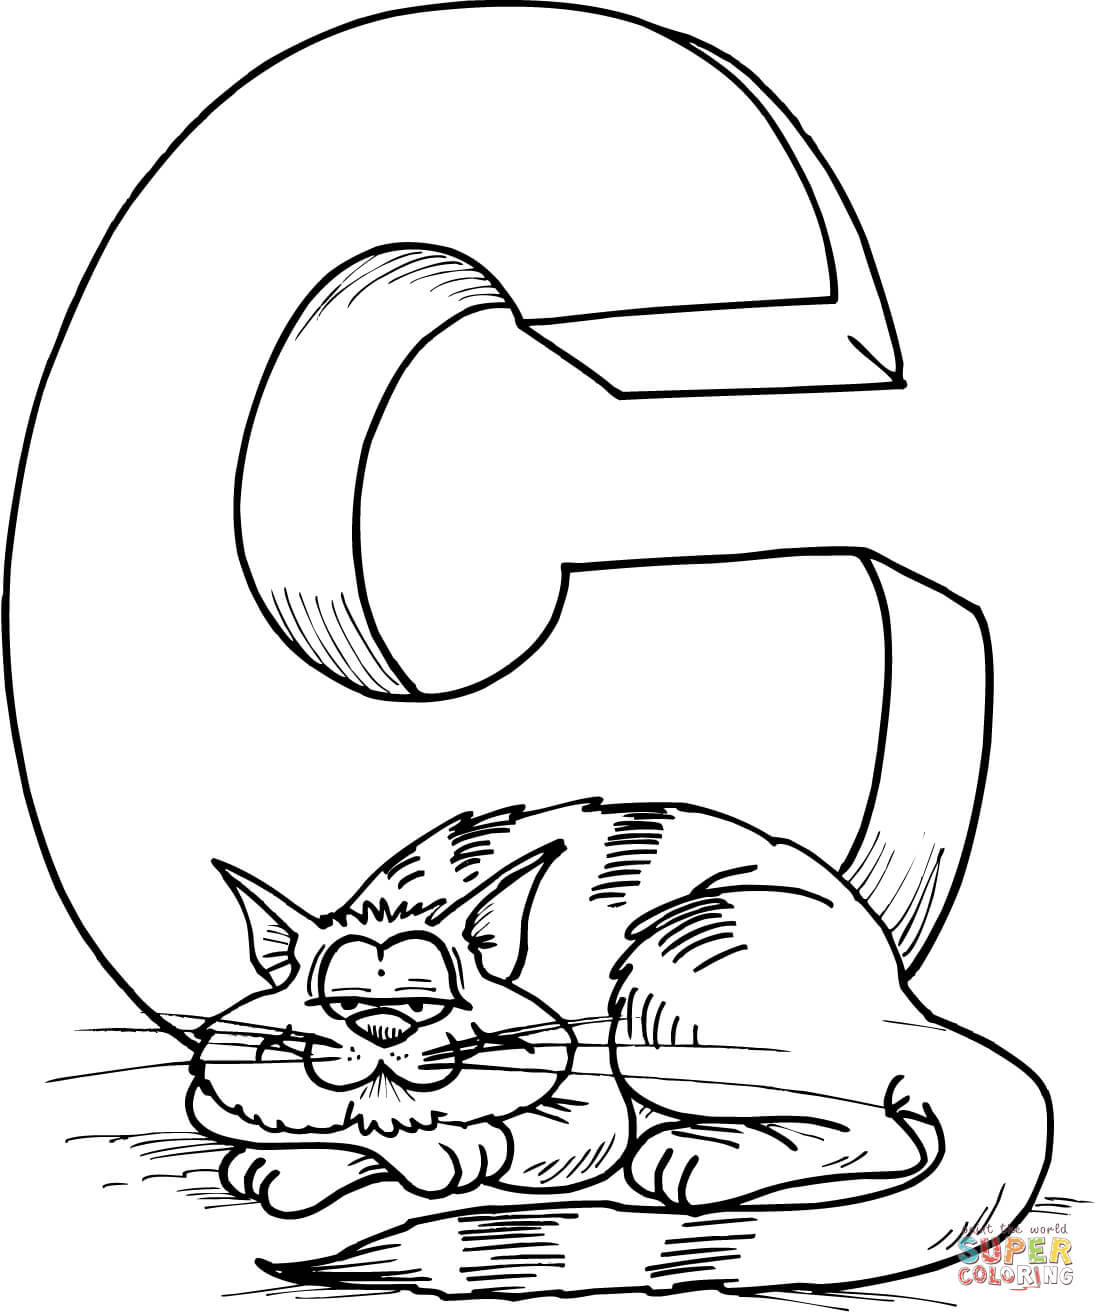 Letter C Coloring Pages
 Letter C is for Cat coloring page